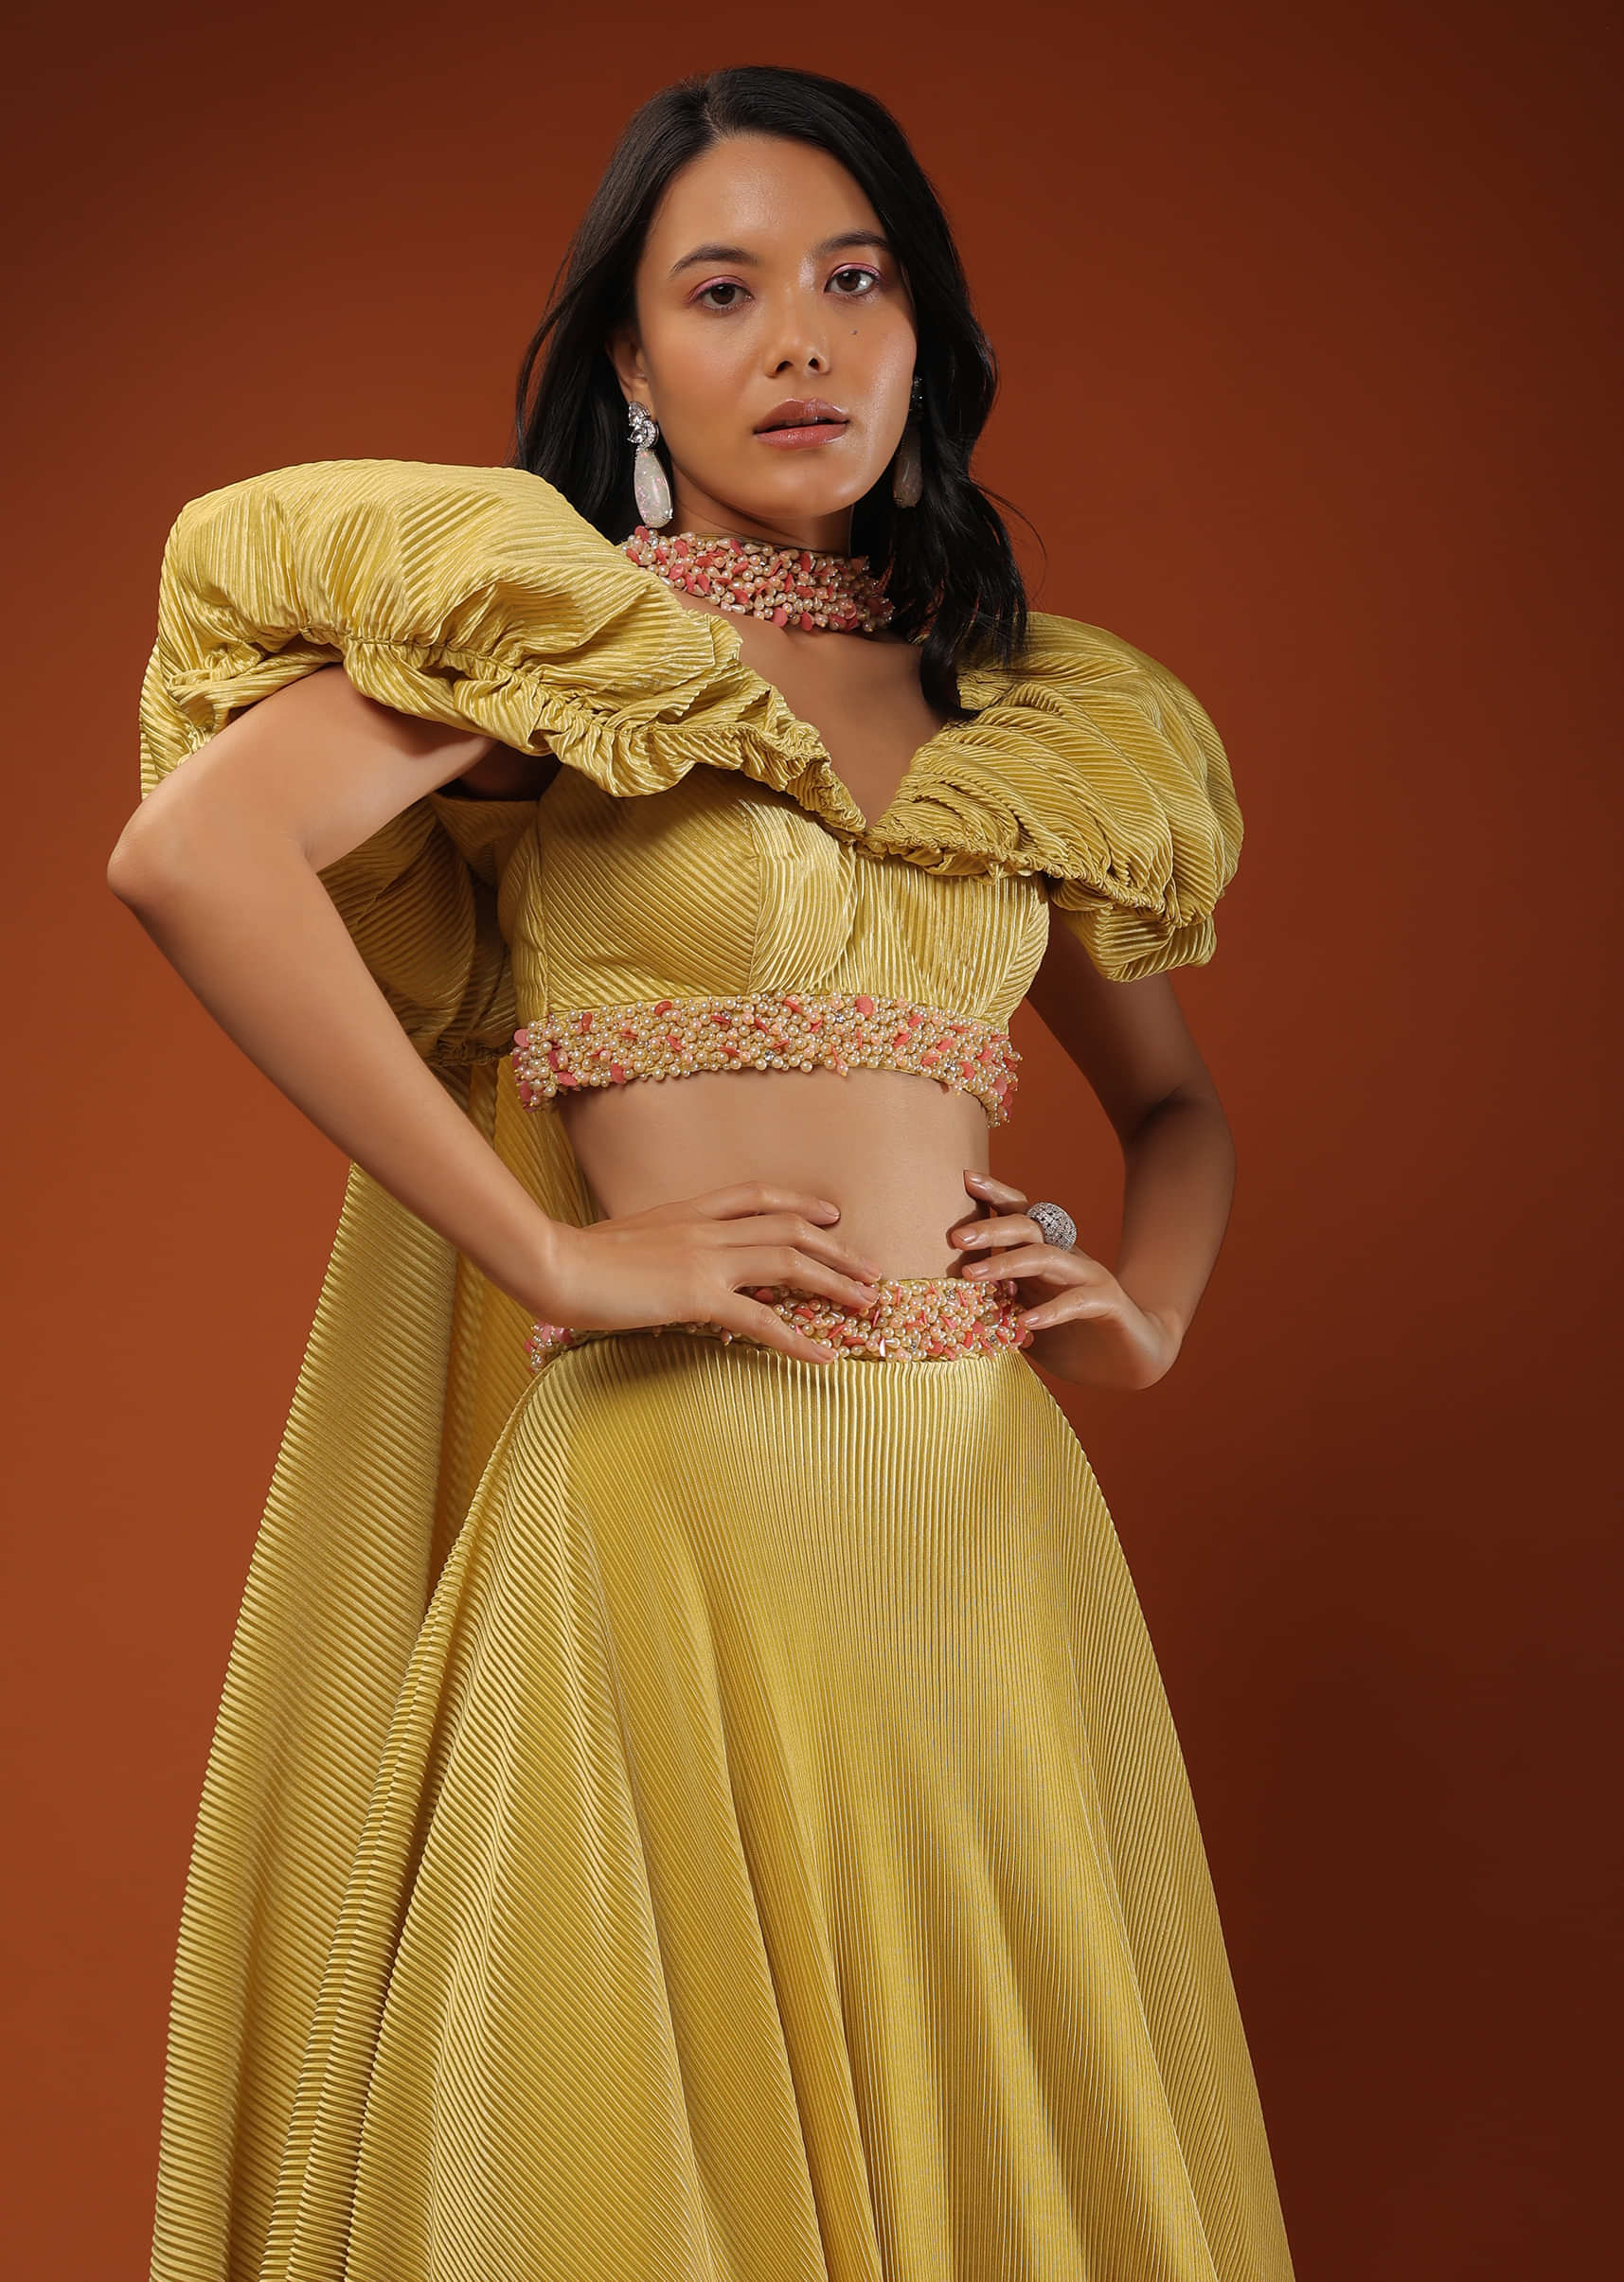 Yellow Crush Lehenga And A Crop Top In Moti Embroidery, Crop Top Comes In Balloon Sleeves Till The Yoke